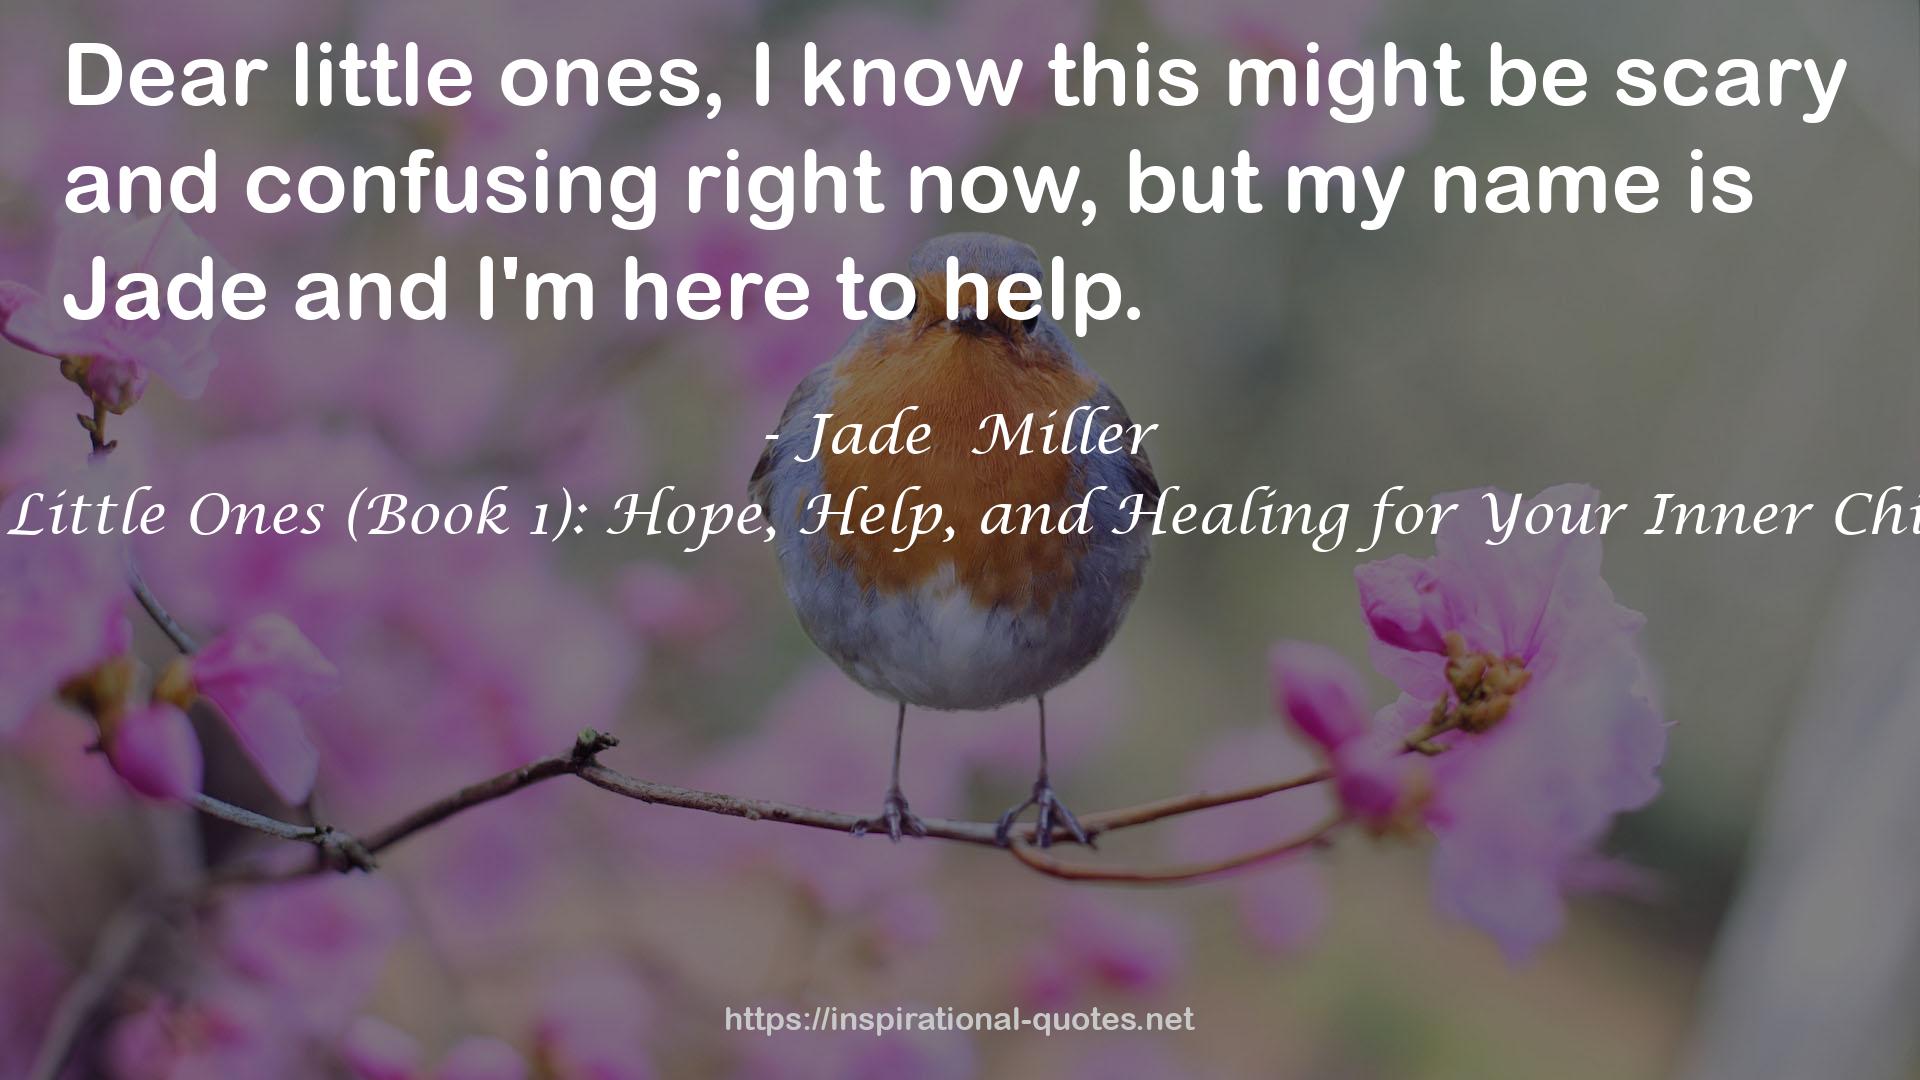 Dear Little Ones (Book 1): Hope, Help, and Healing for Your Inner Children QUOTES